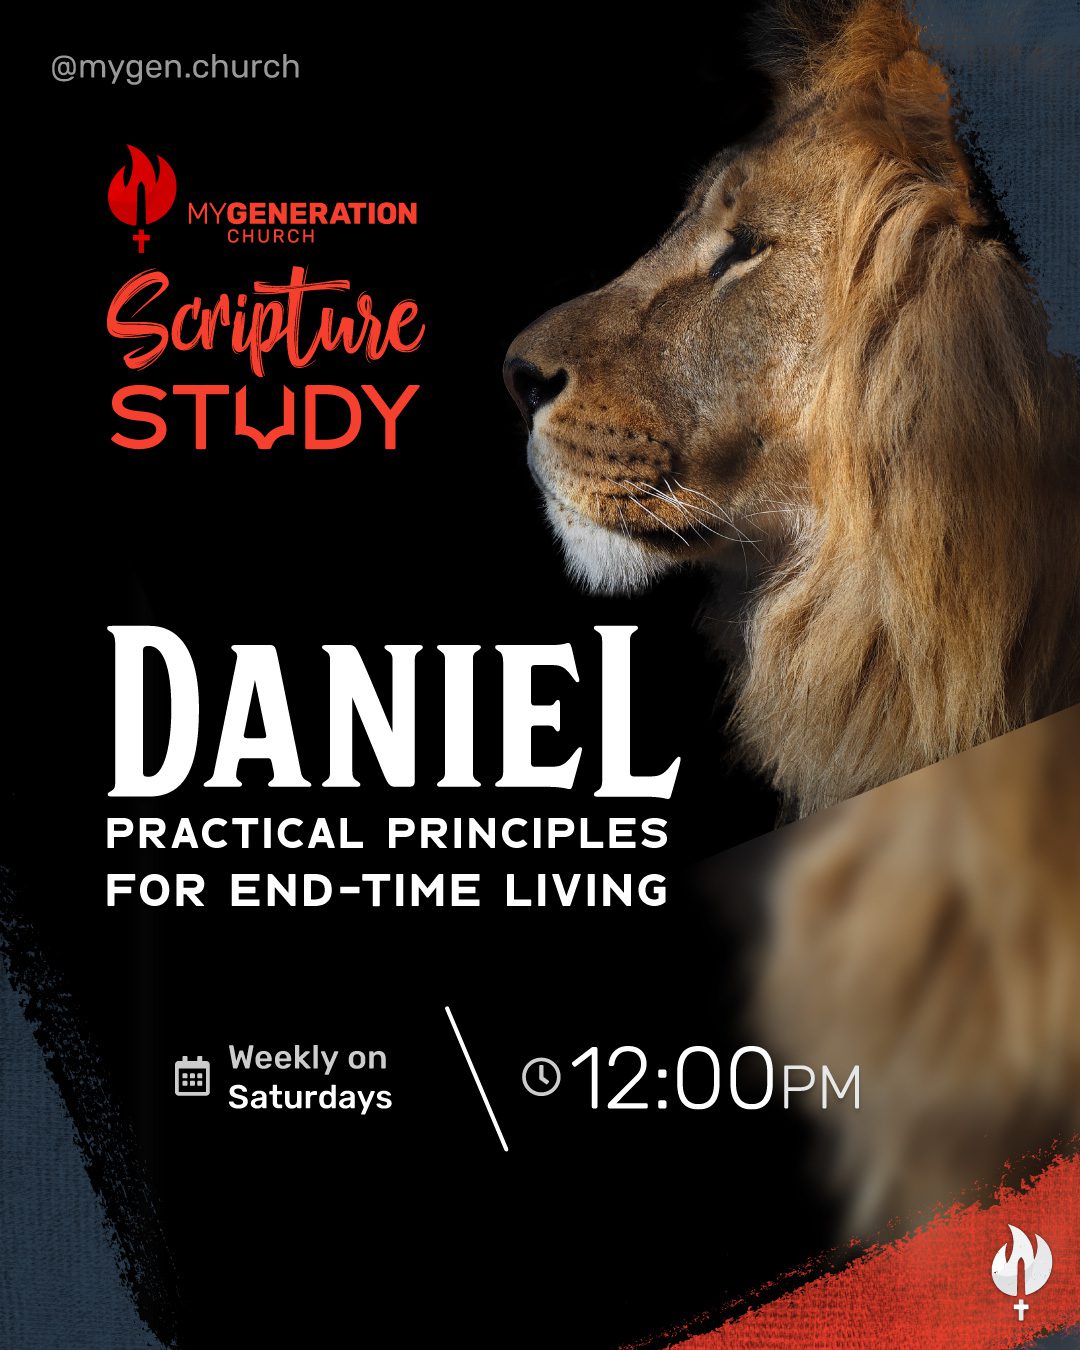 Scripture Study of Daniel: Practical Principles for End-Time Living